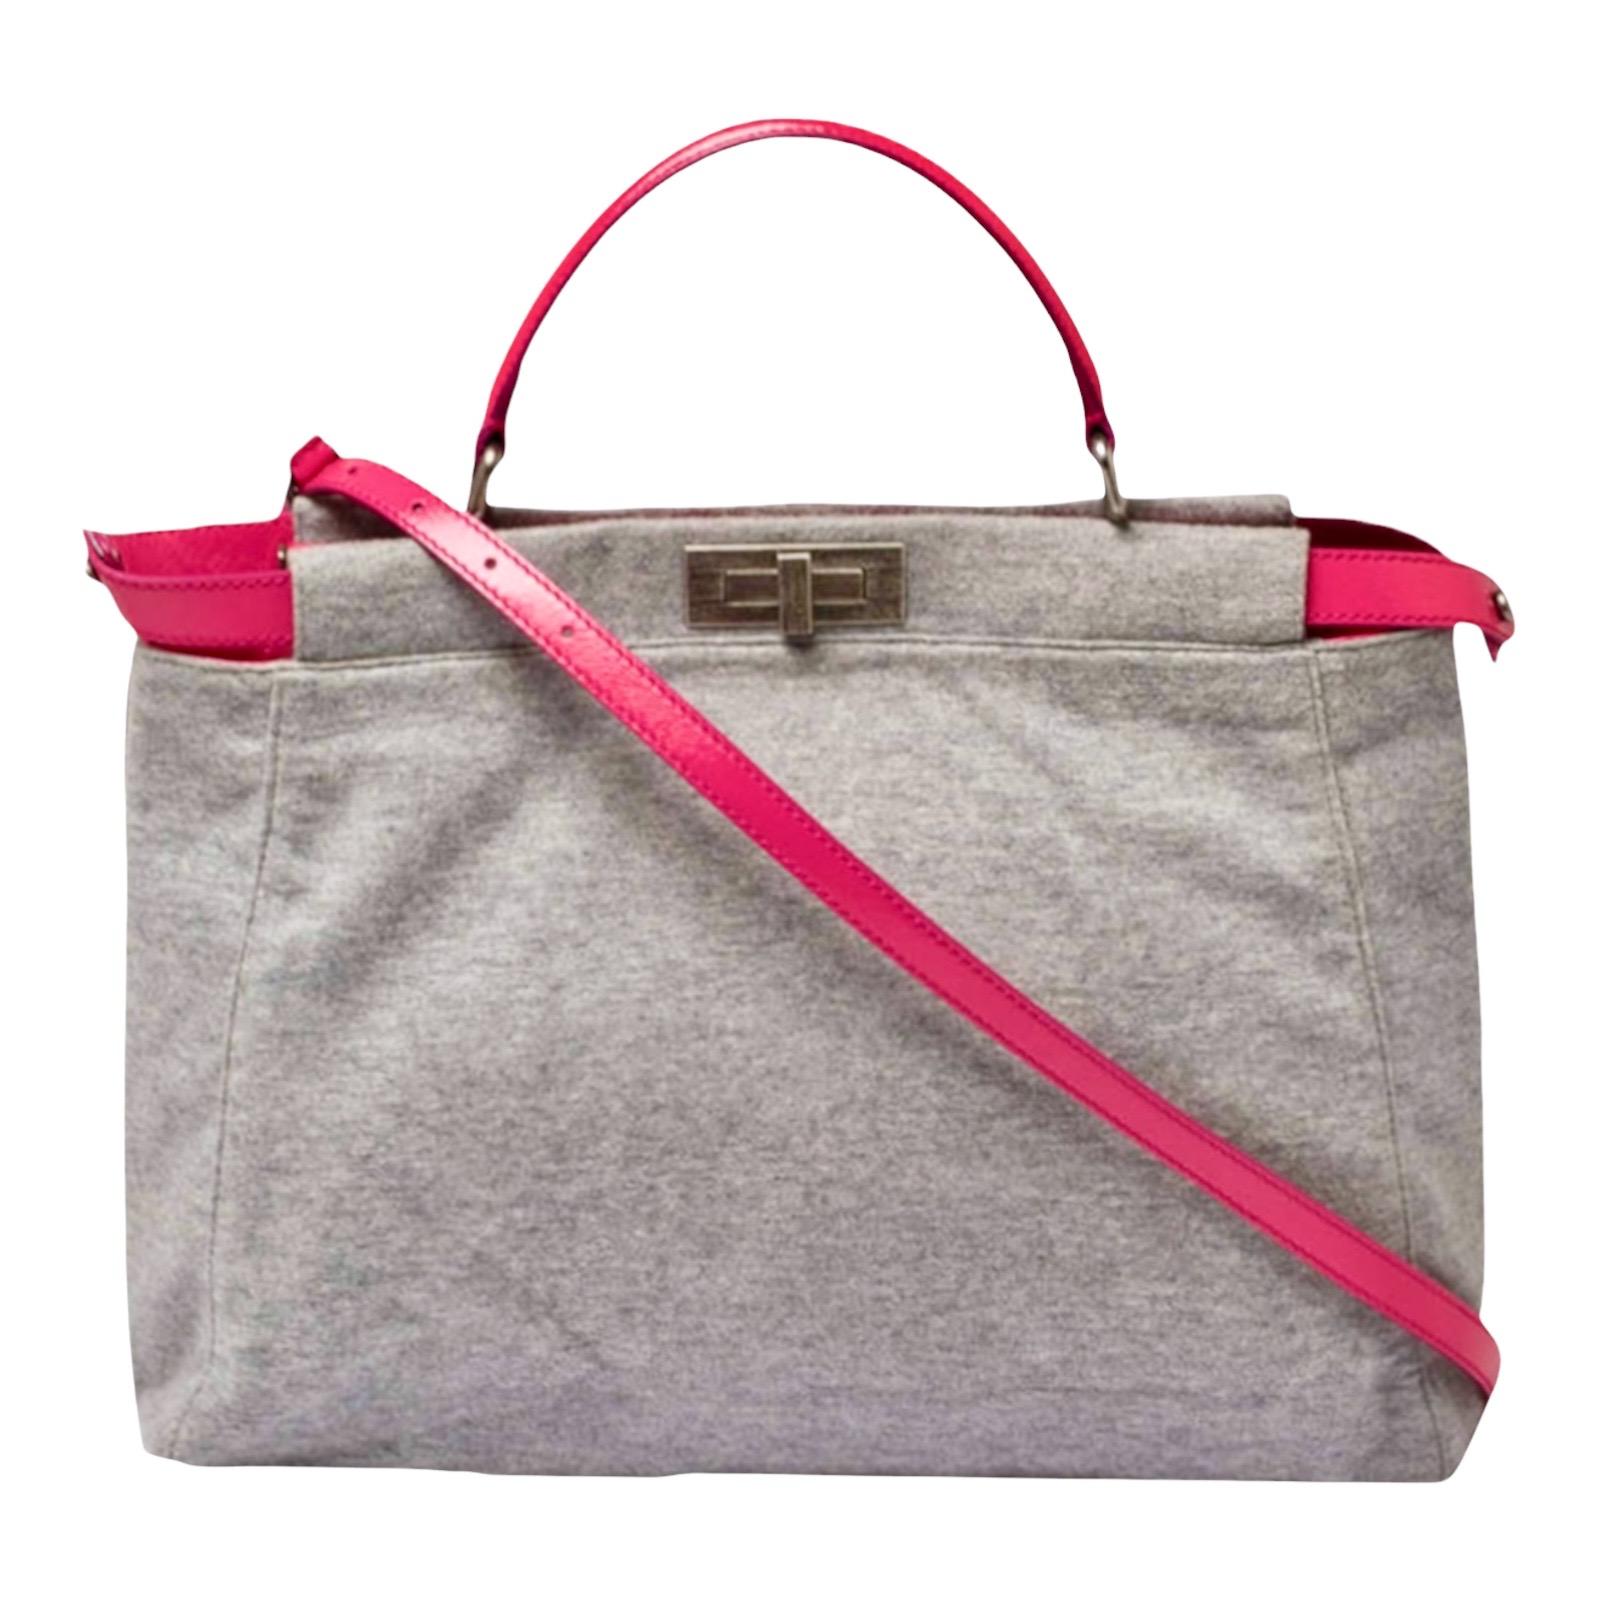 Women's UNWORN Fendi Large Peekaboo Limited Edition Pink Leather & Grey Bag with Strap For Sale